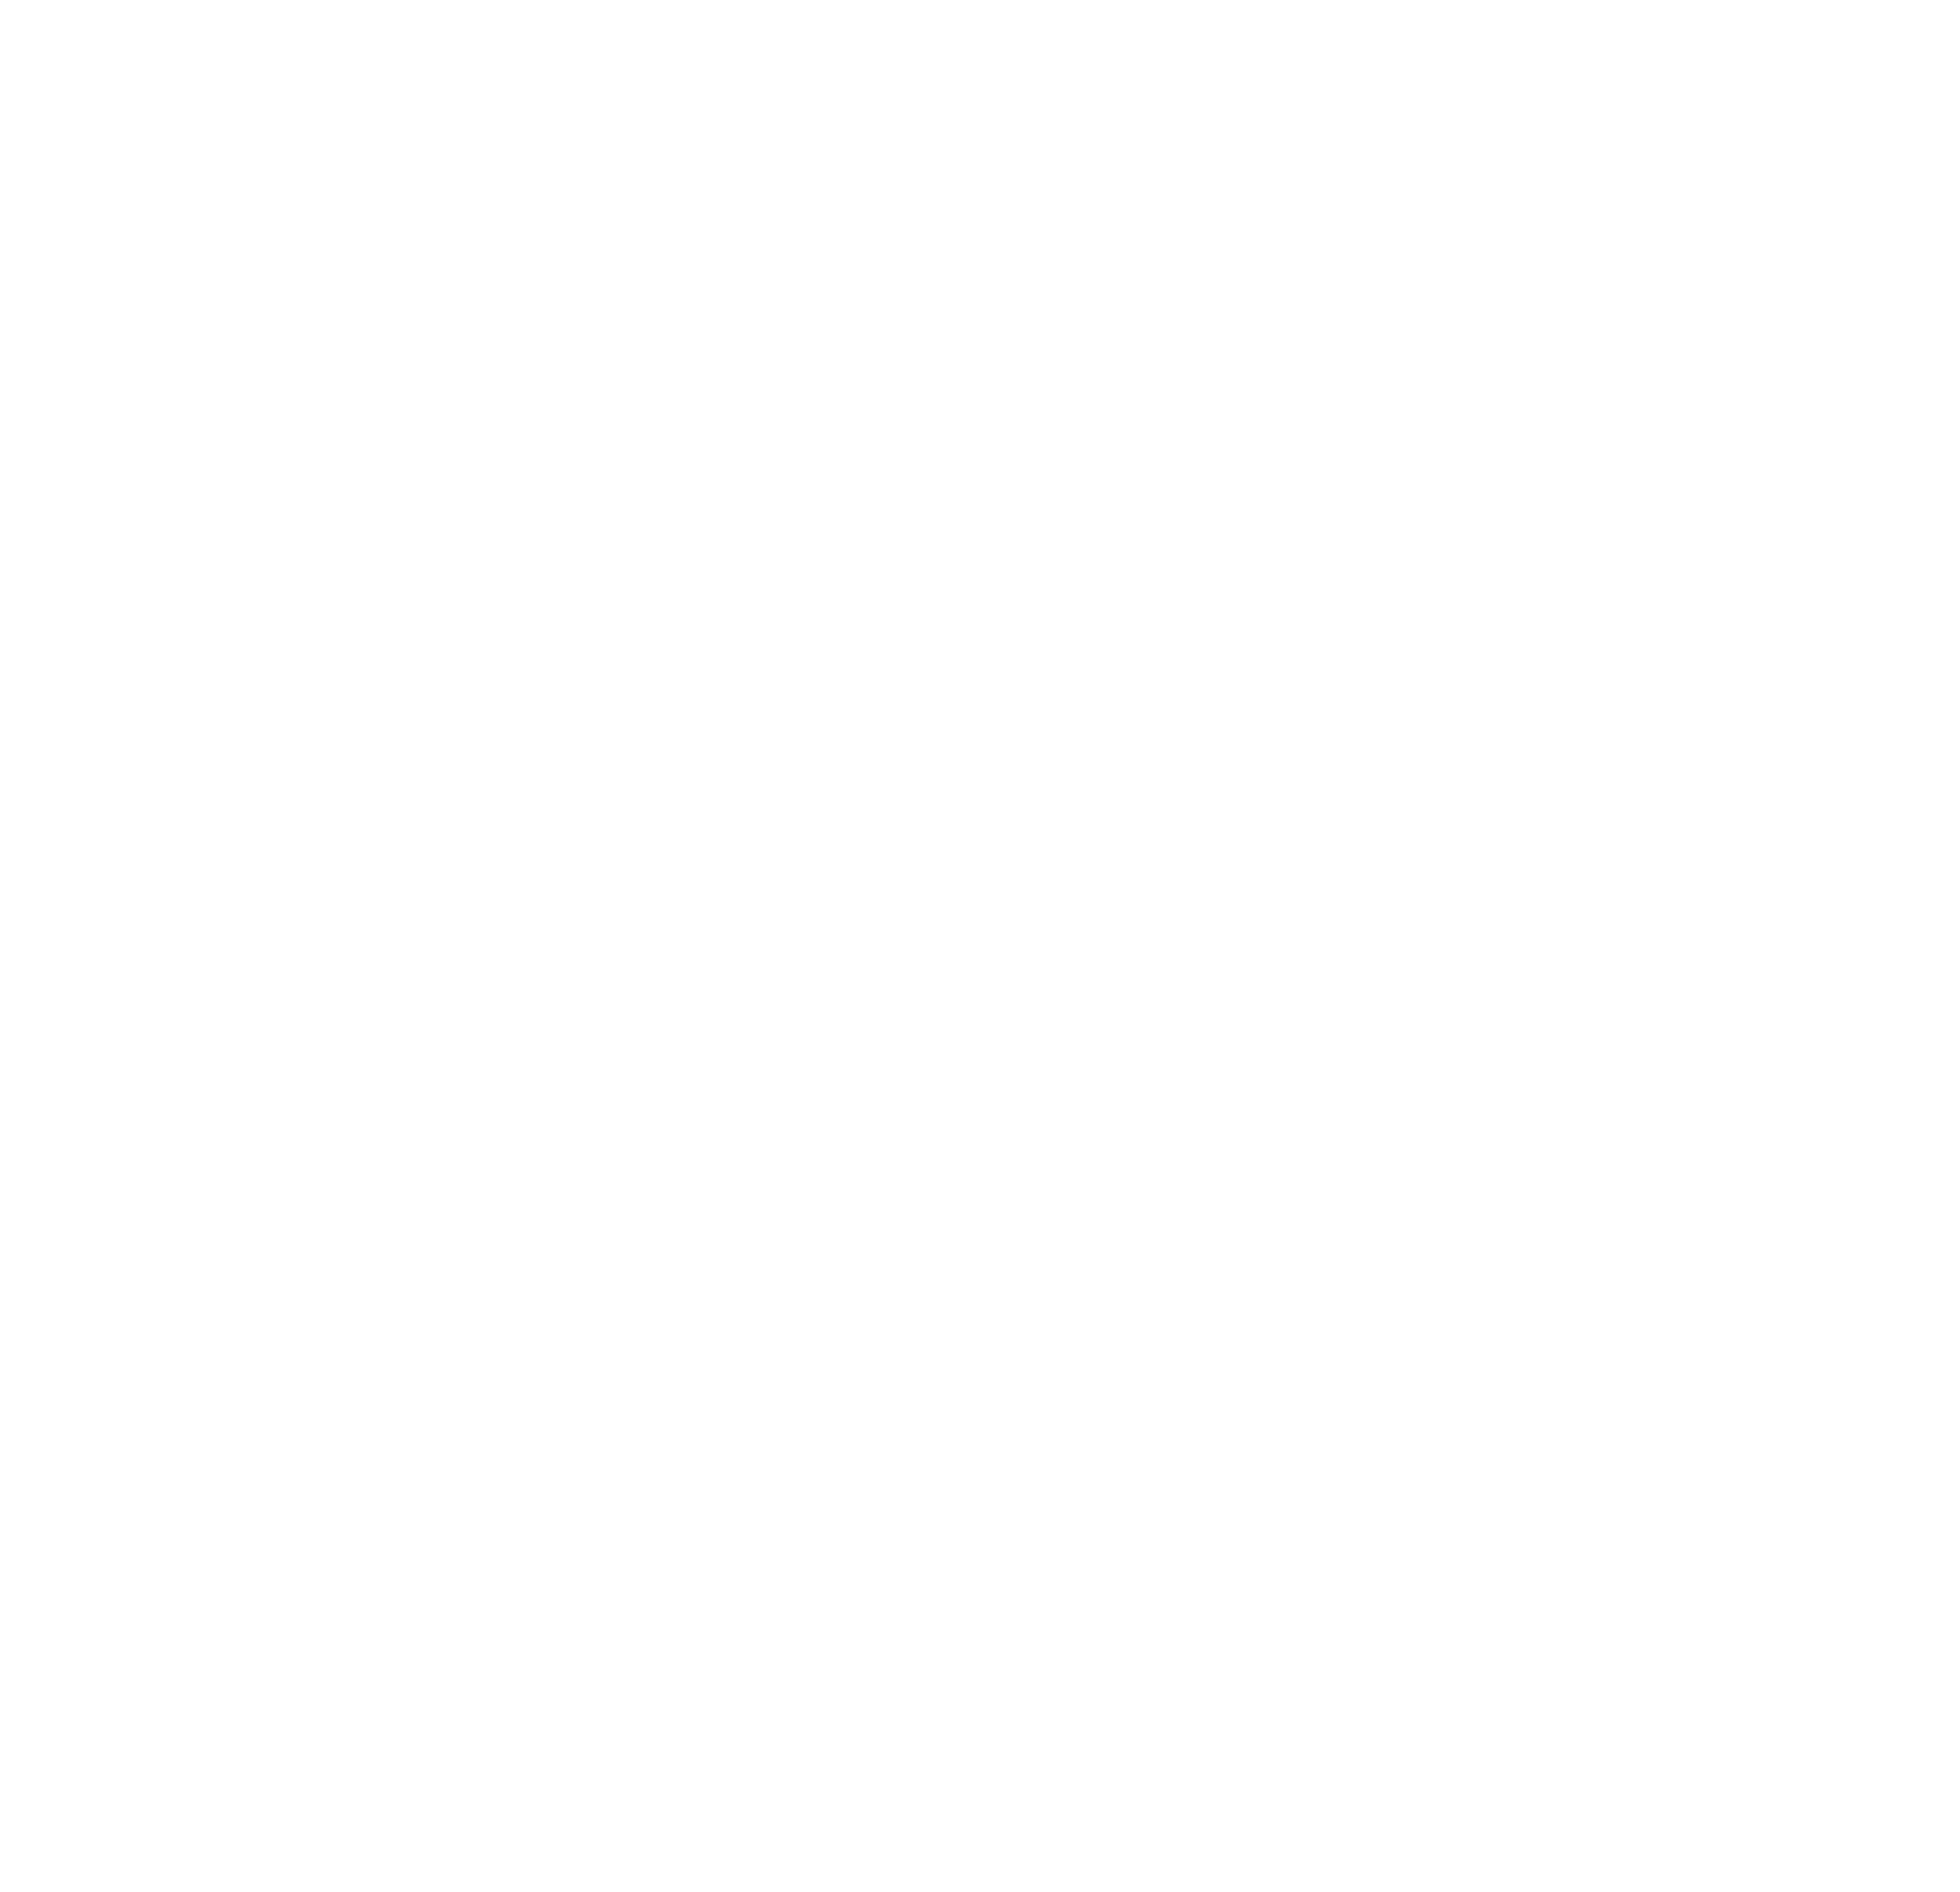 Adidas United Service Business Brand States Logo PNG Image